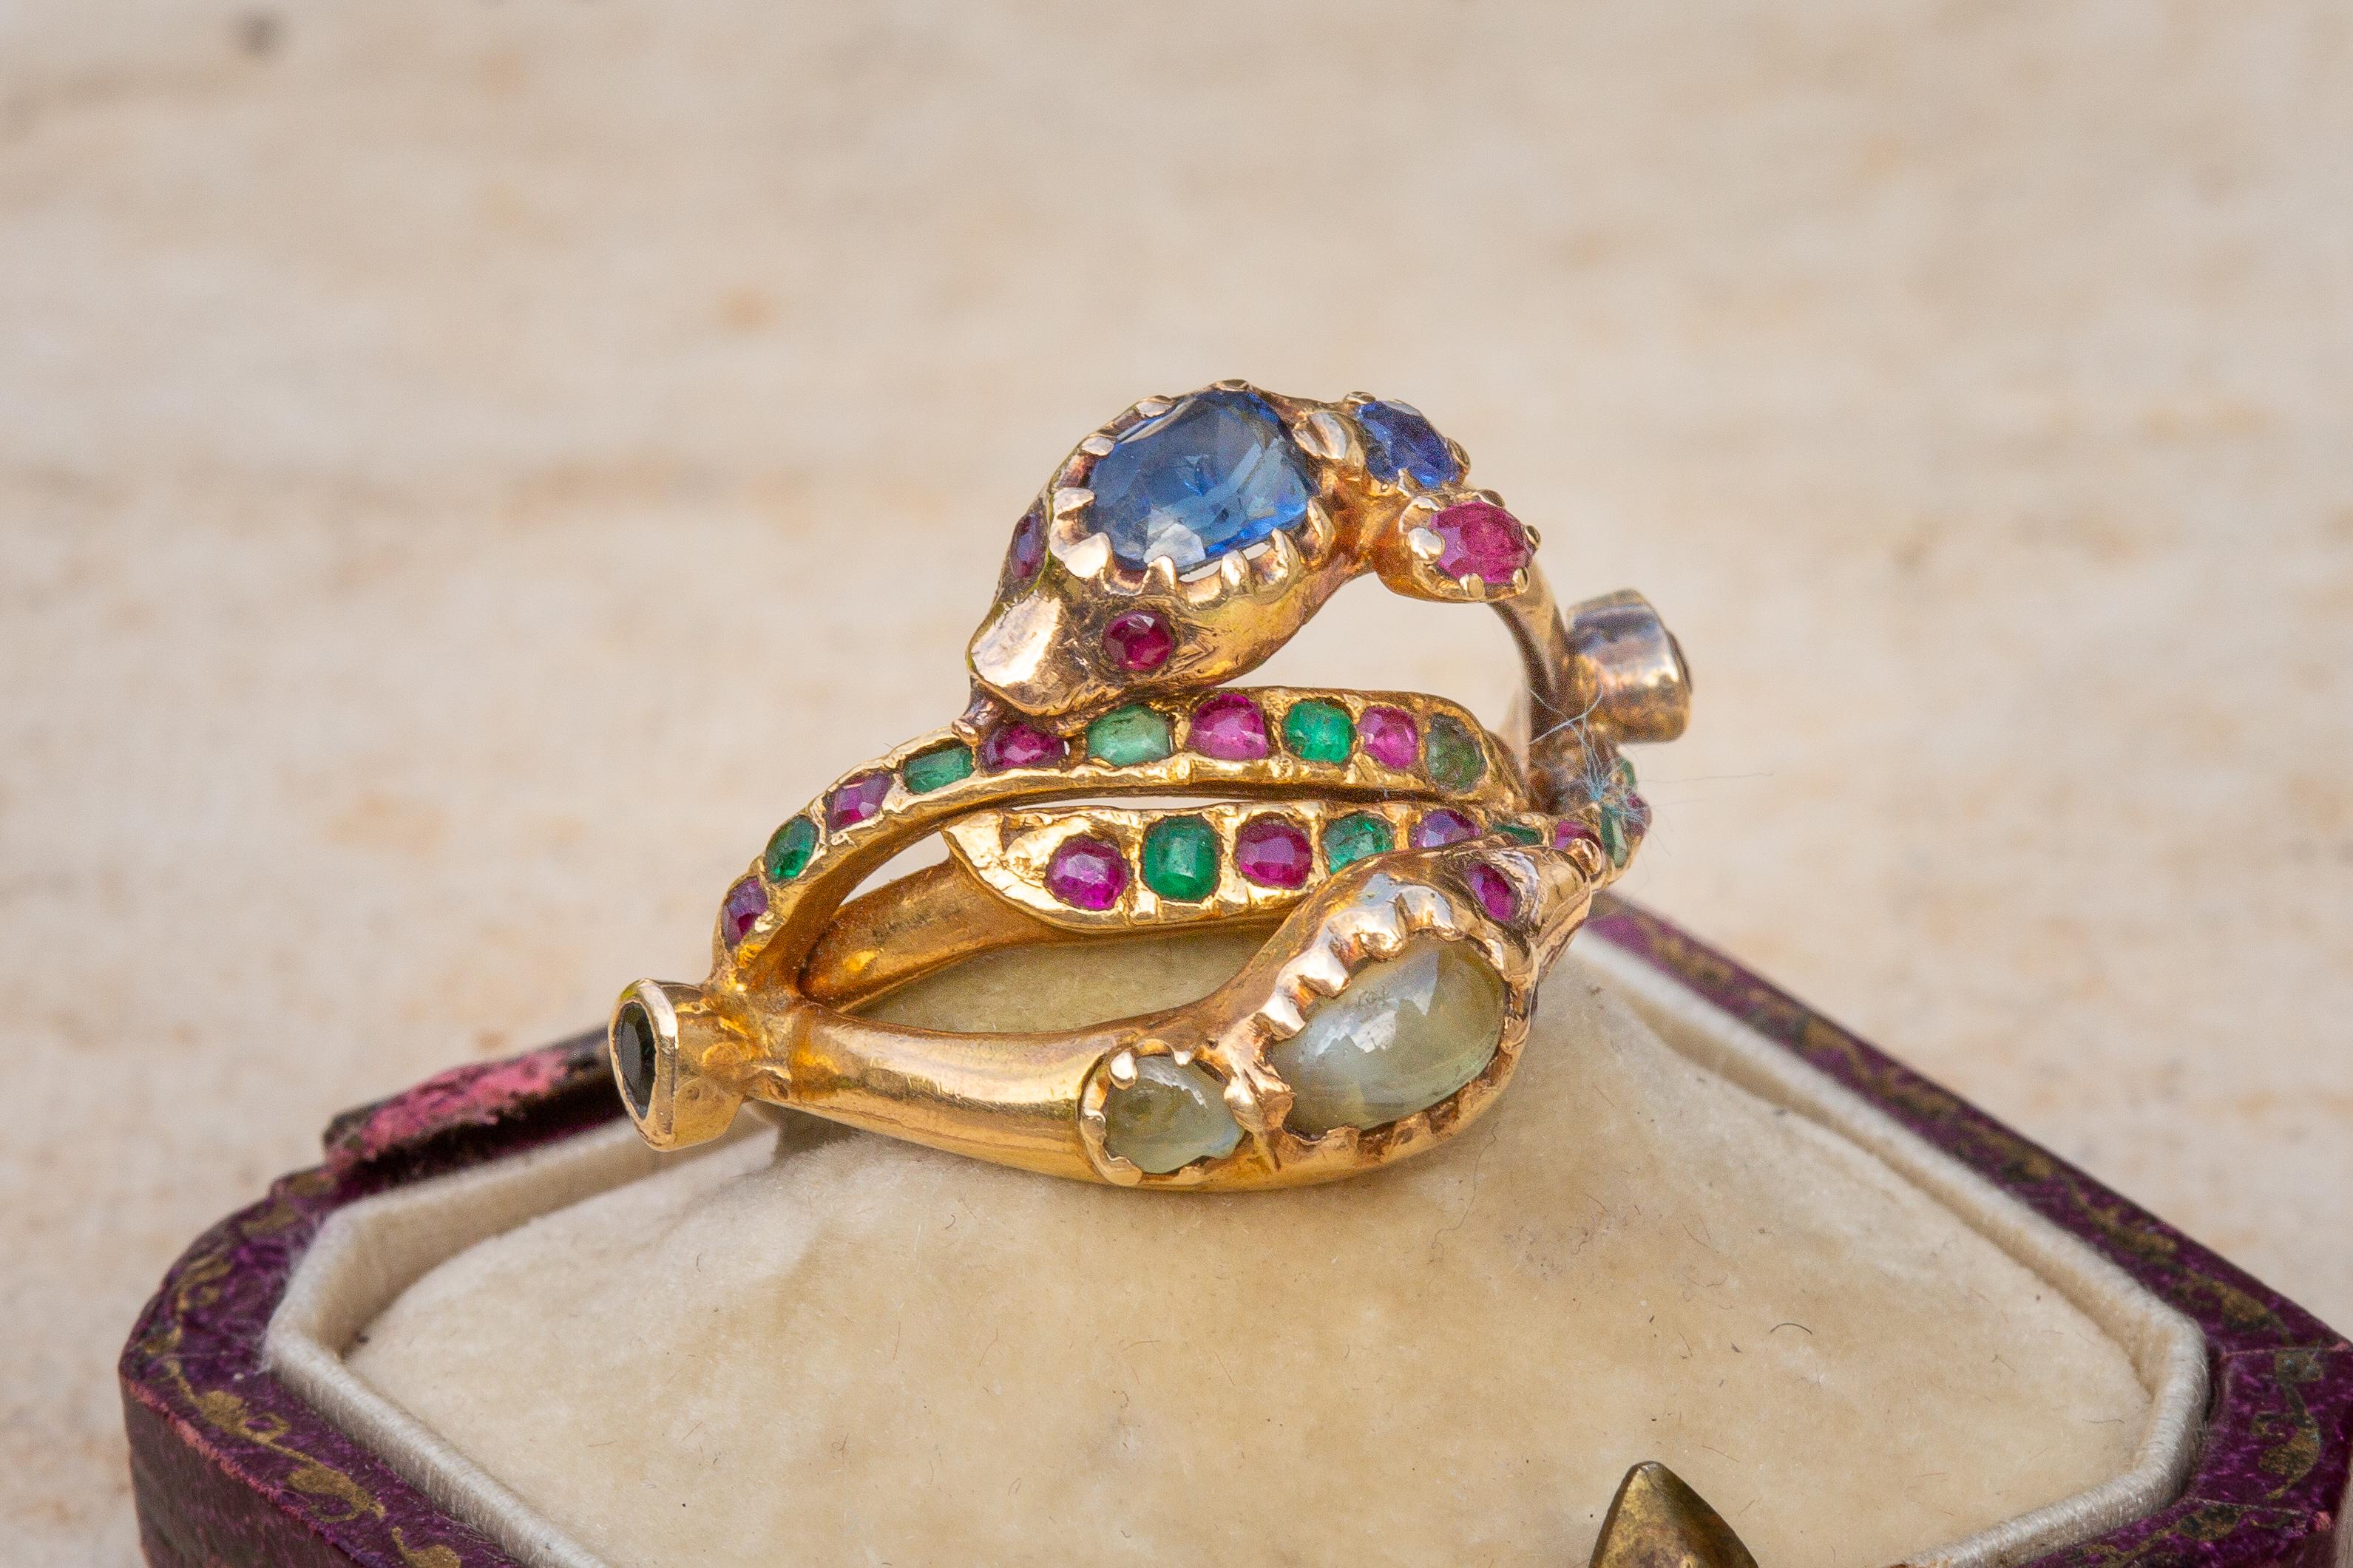 Crafted from two individual gold bands, these coiled serpents lock together to form a beautiful intertwined double snake ring. 

Intricate and unusual in design, this ring crafted was a challenging commission. The eyes are set with rubies, the